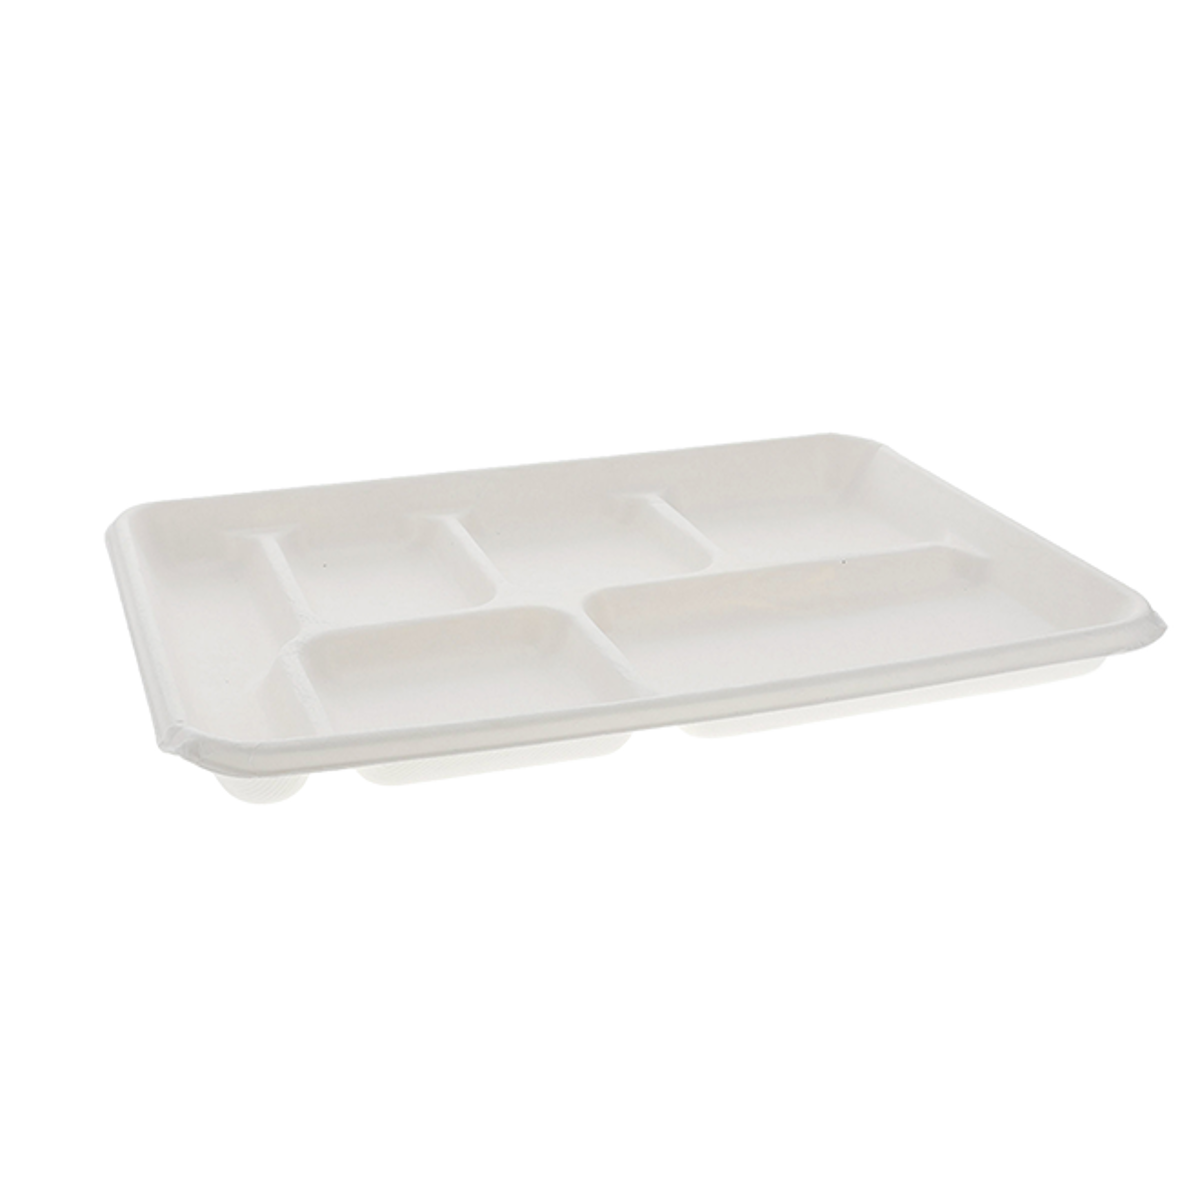 12.75” x 8.5” x 1.25” Compostable Molded Fiber 6 Compartment Tray